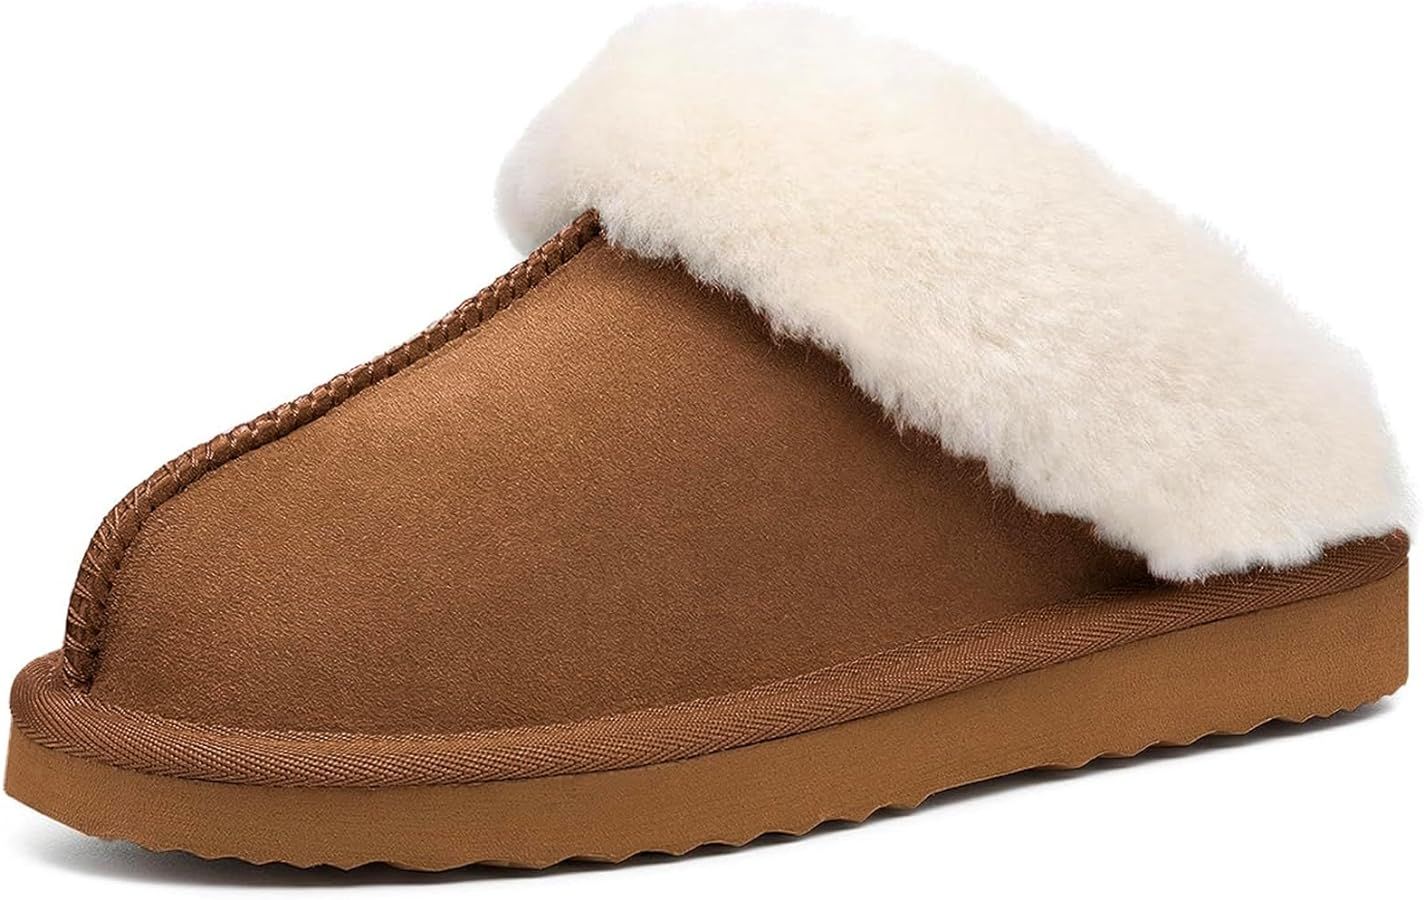 LazyStep Women's Madge Fuzzy Slippers with Comfort Memory Foam, Slip-on Warm Outdoor Indoor House... | Amazon (US)